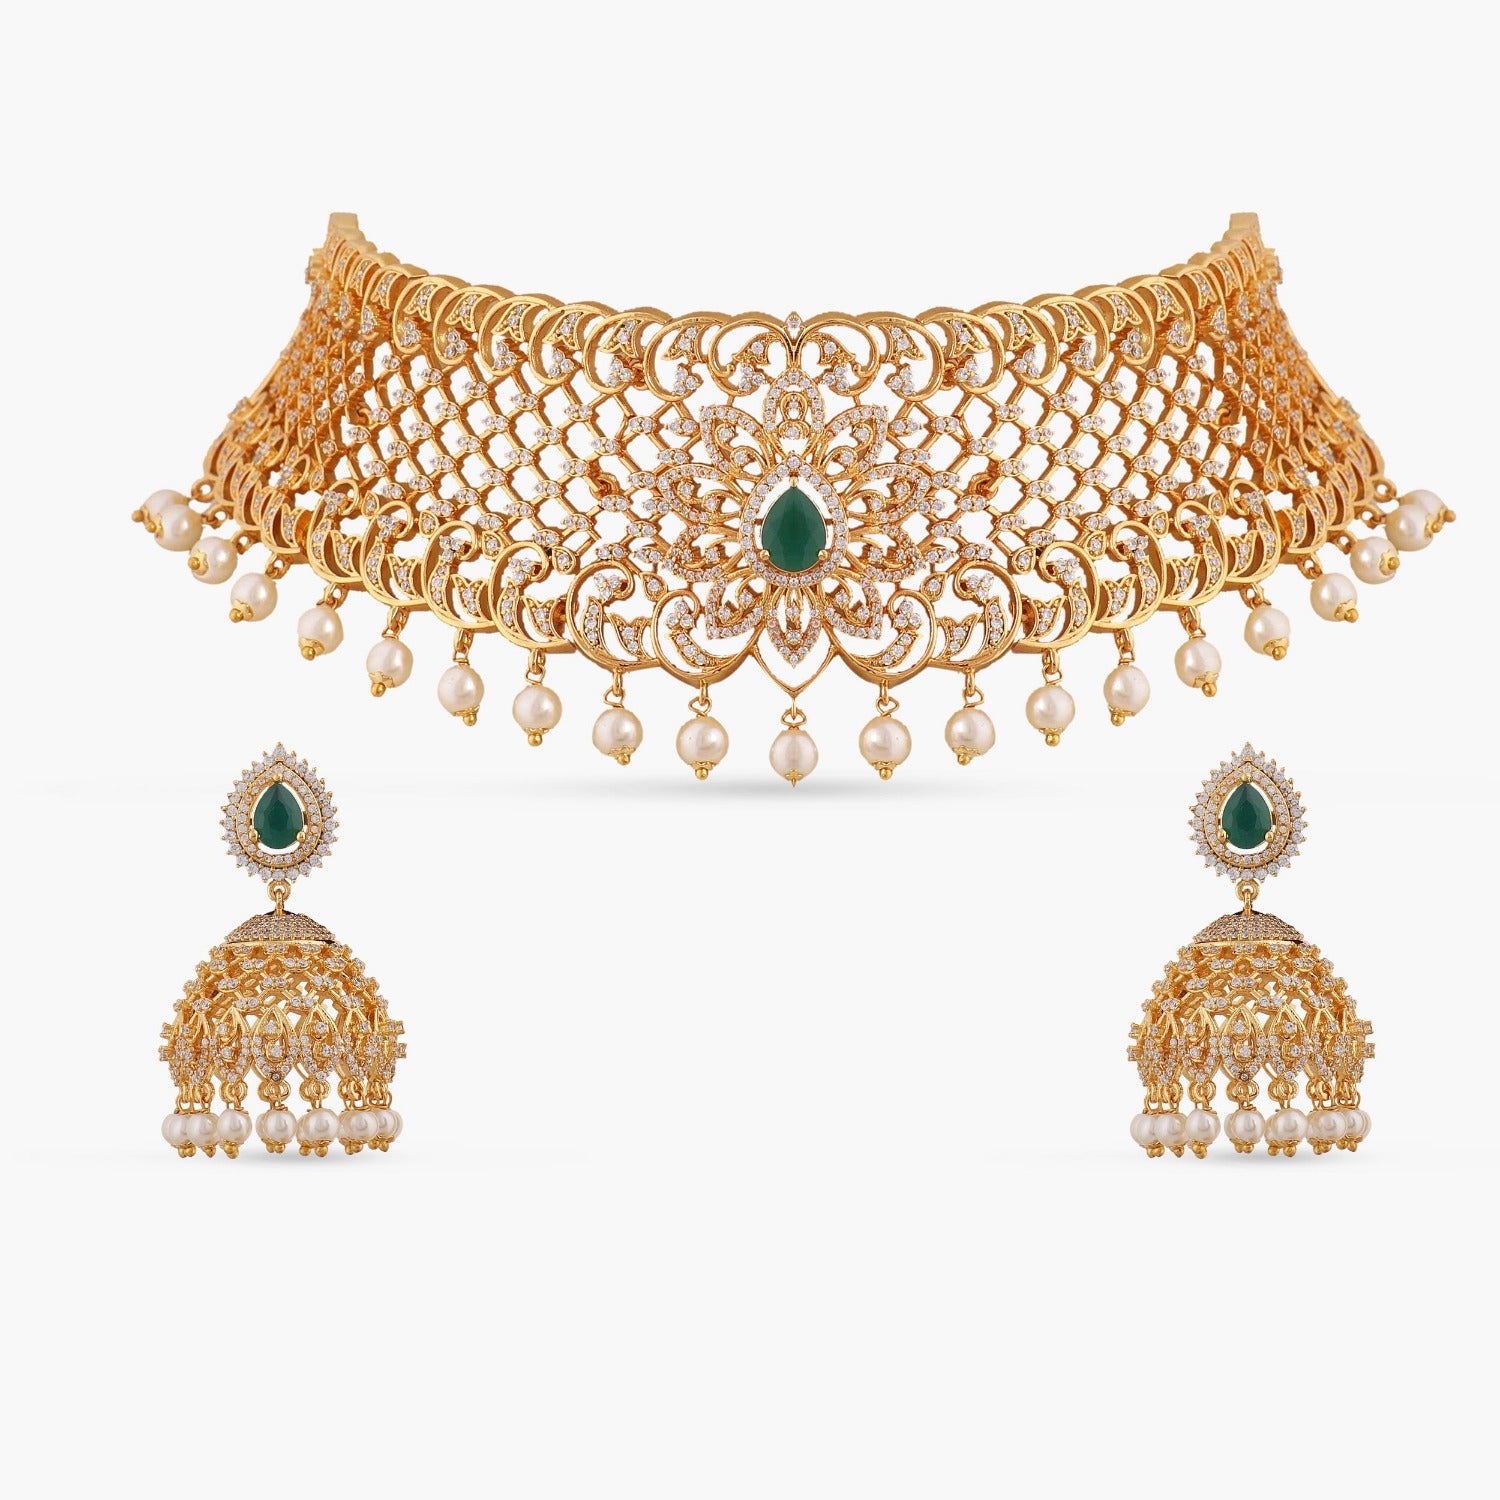  TARINIKA Antique Gold Plated Yami Choker Set with Floral Design  - Indian Jewelry Sets for Women, Perfect for Ethnic Occasions, Traditional Indian Choker Jewelry set